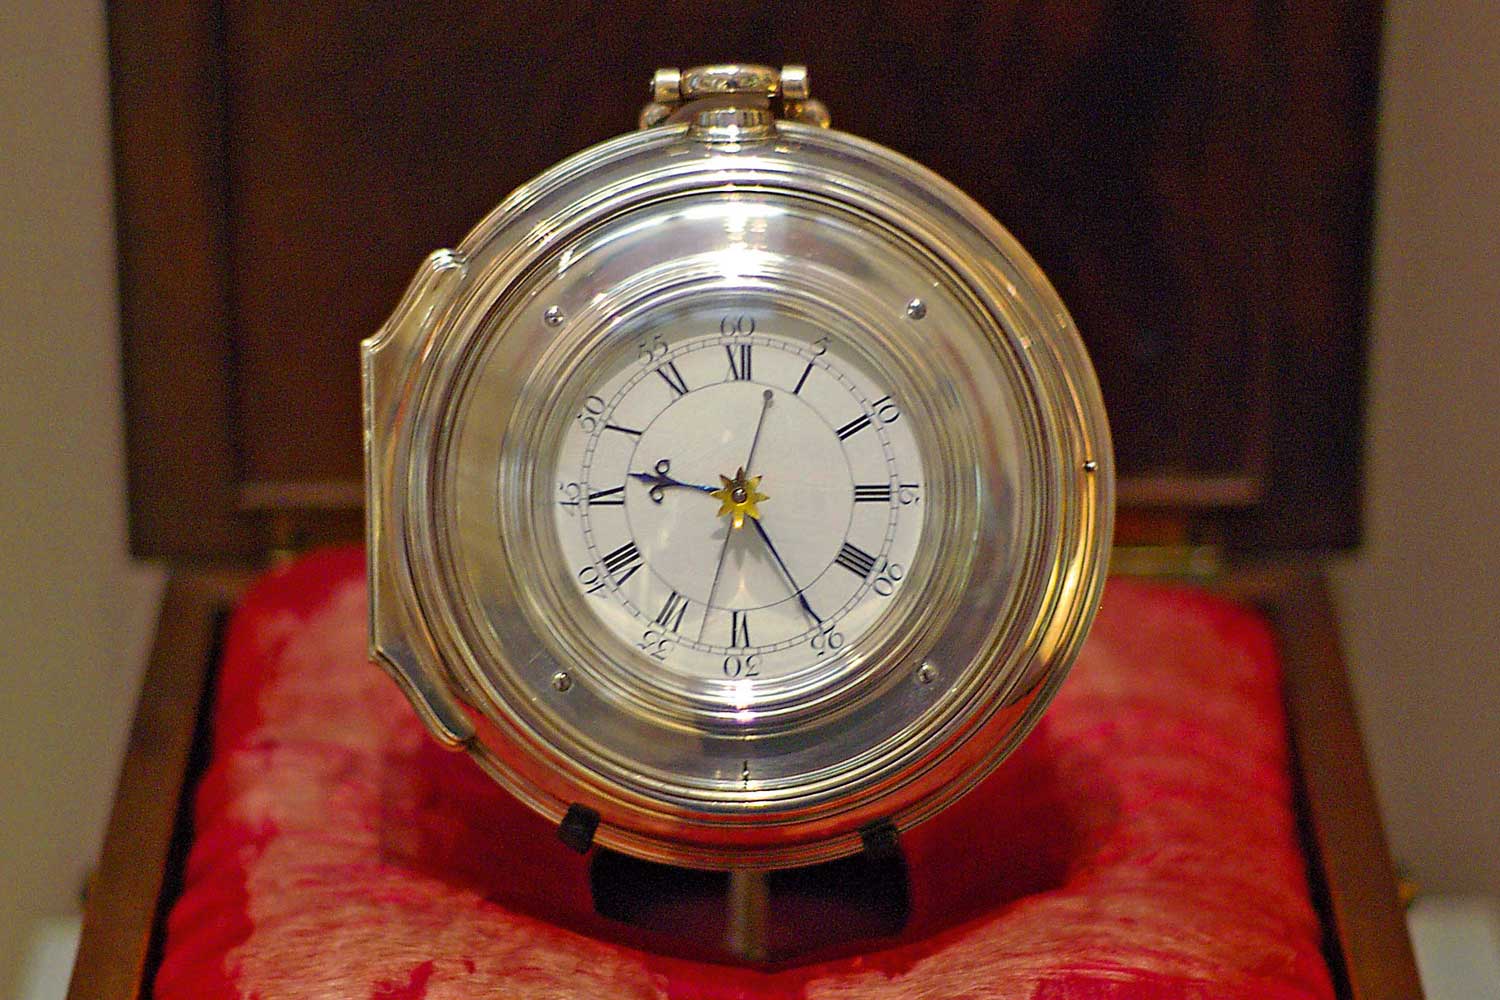 Harrison’s H5 was bestowed the title “Marine Chronometer” in 1773